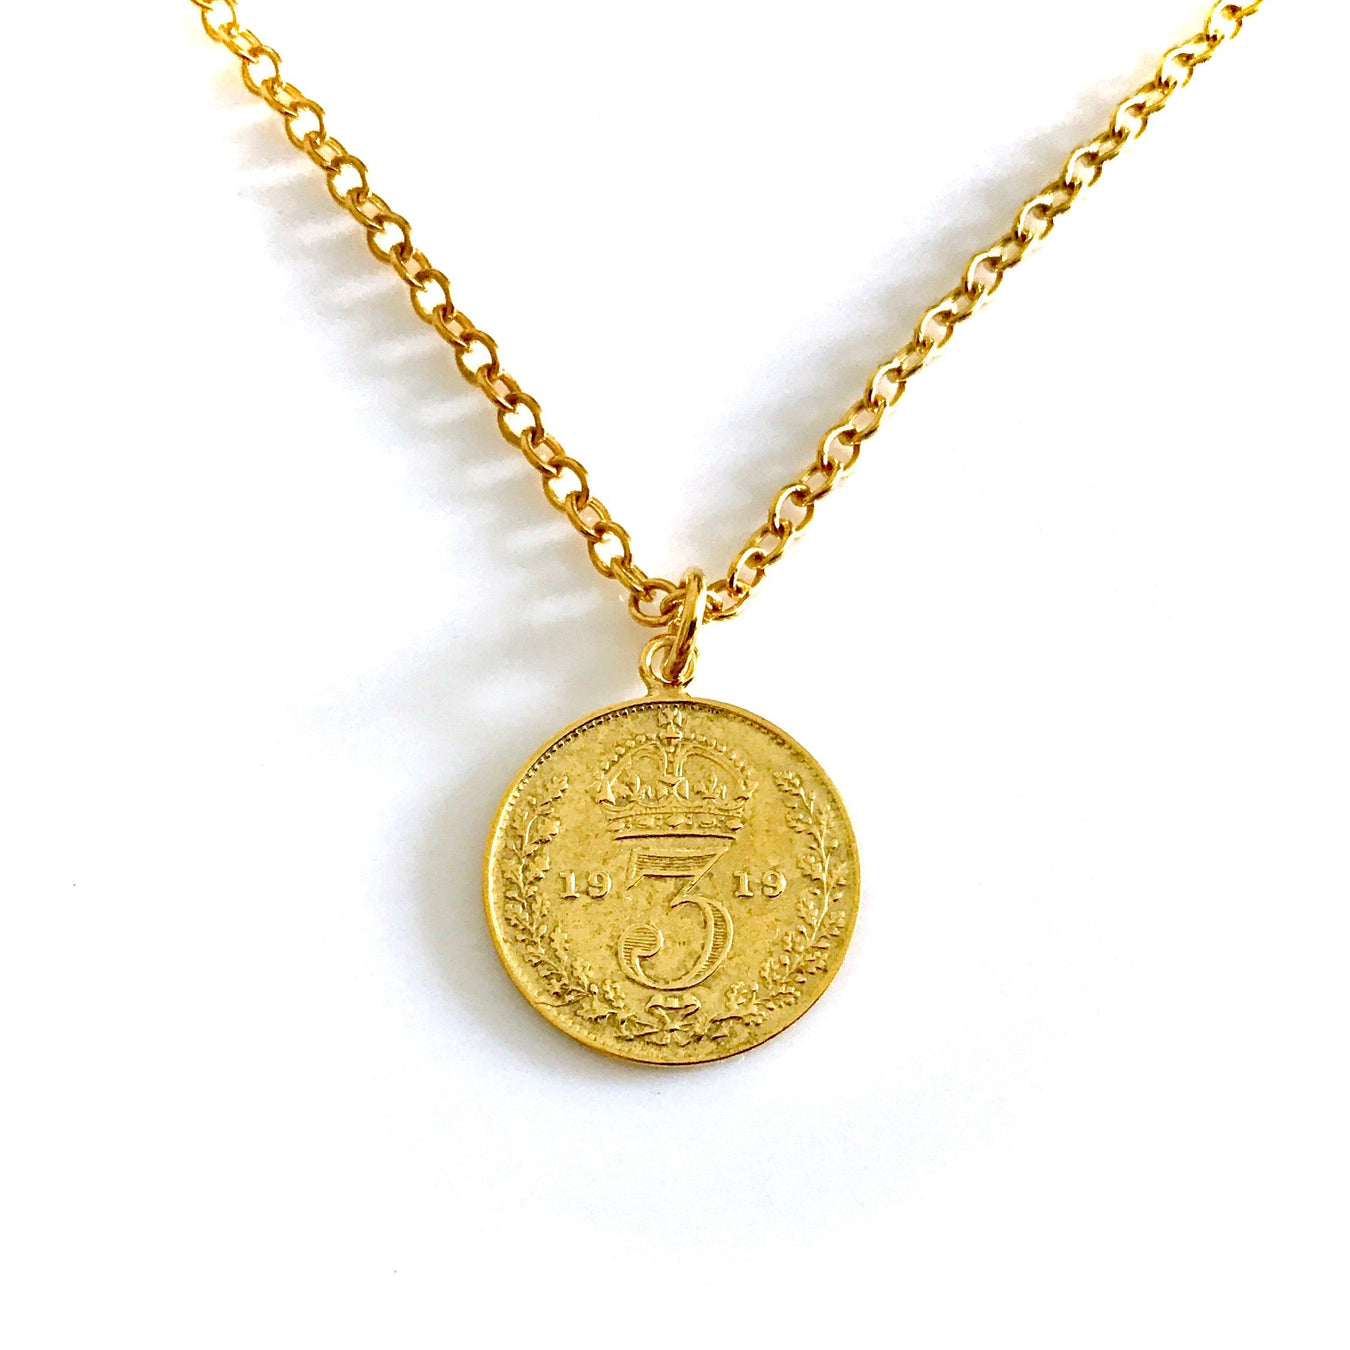 Roberts & Co Coin Necklaces Collection